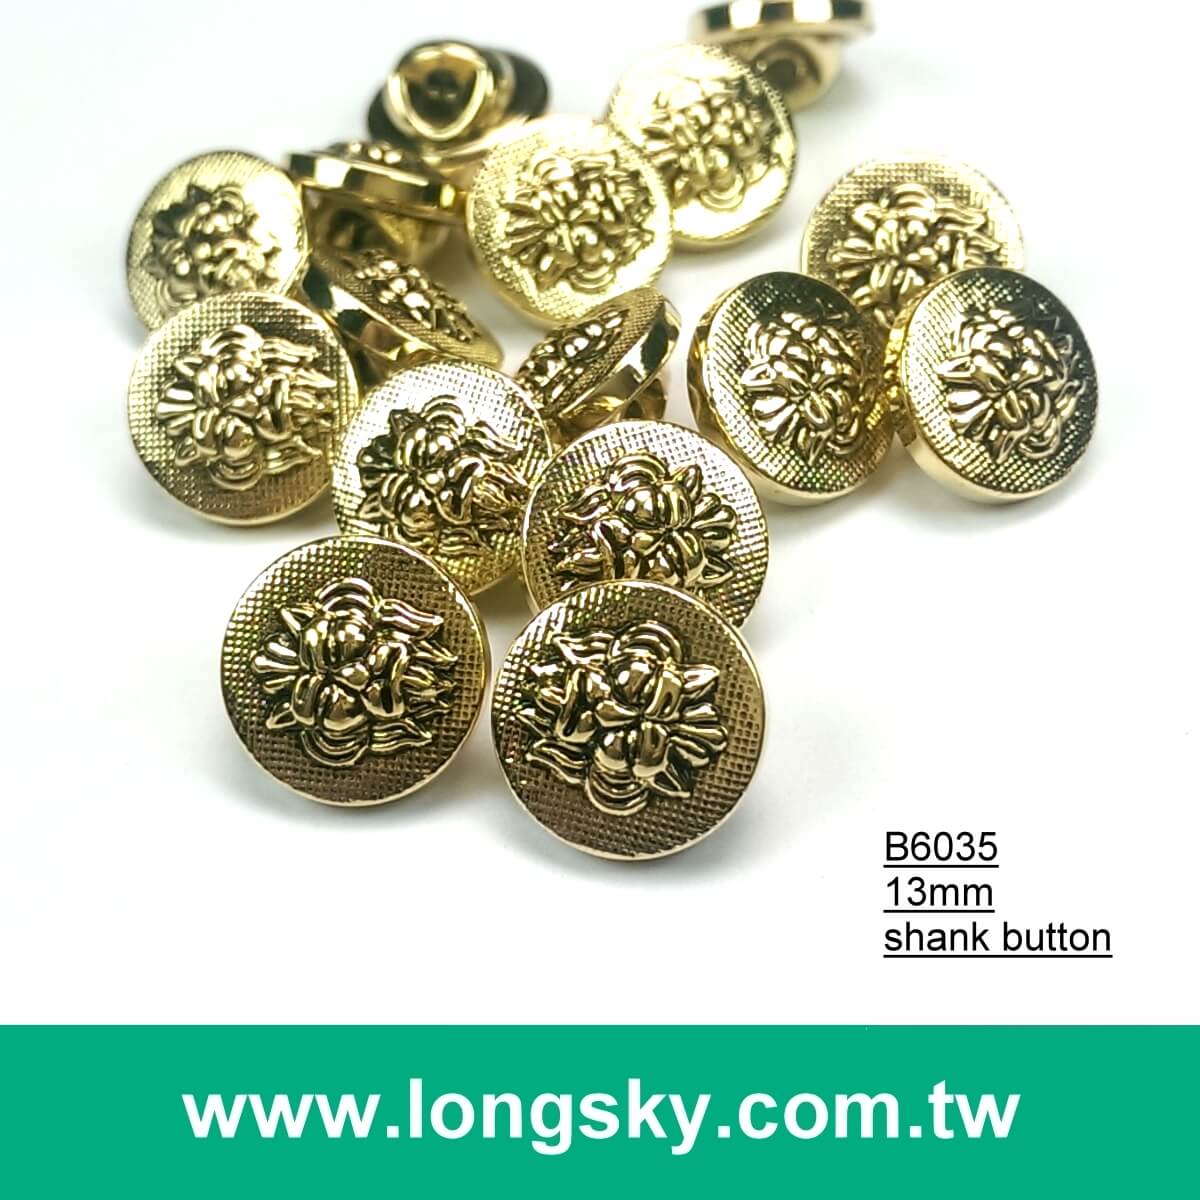 (#B6035/13mm) round shape abs material metallic plating effects shank button with lion totem